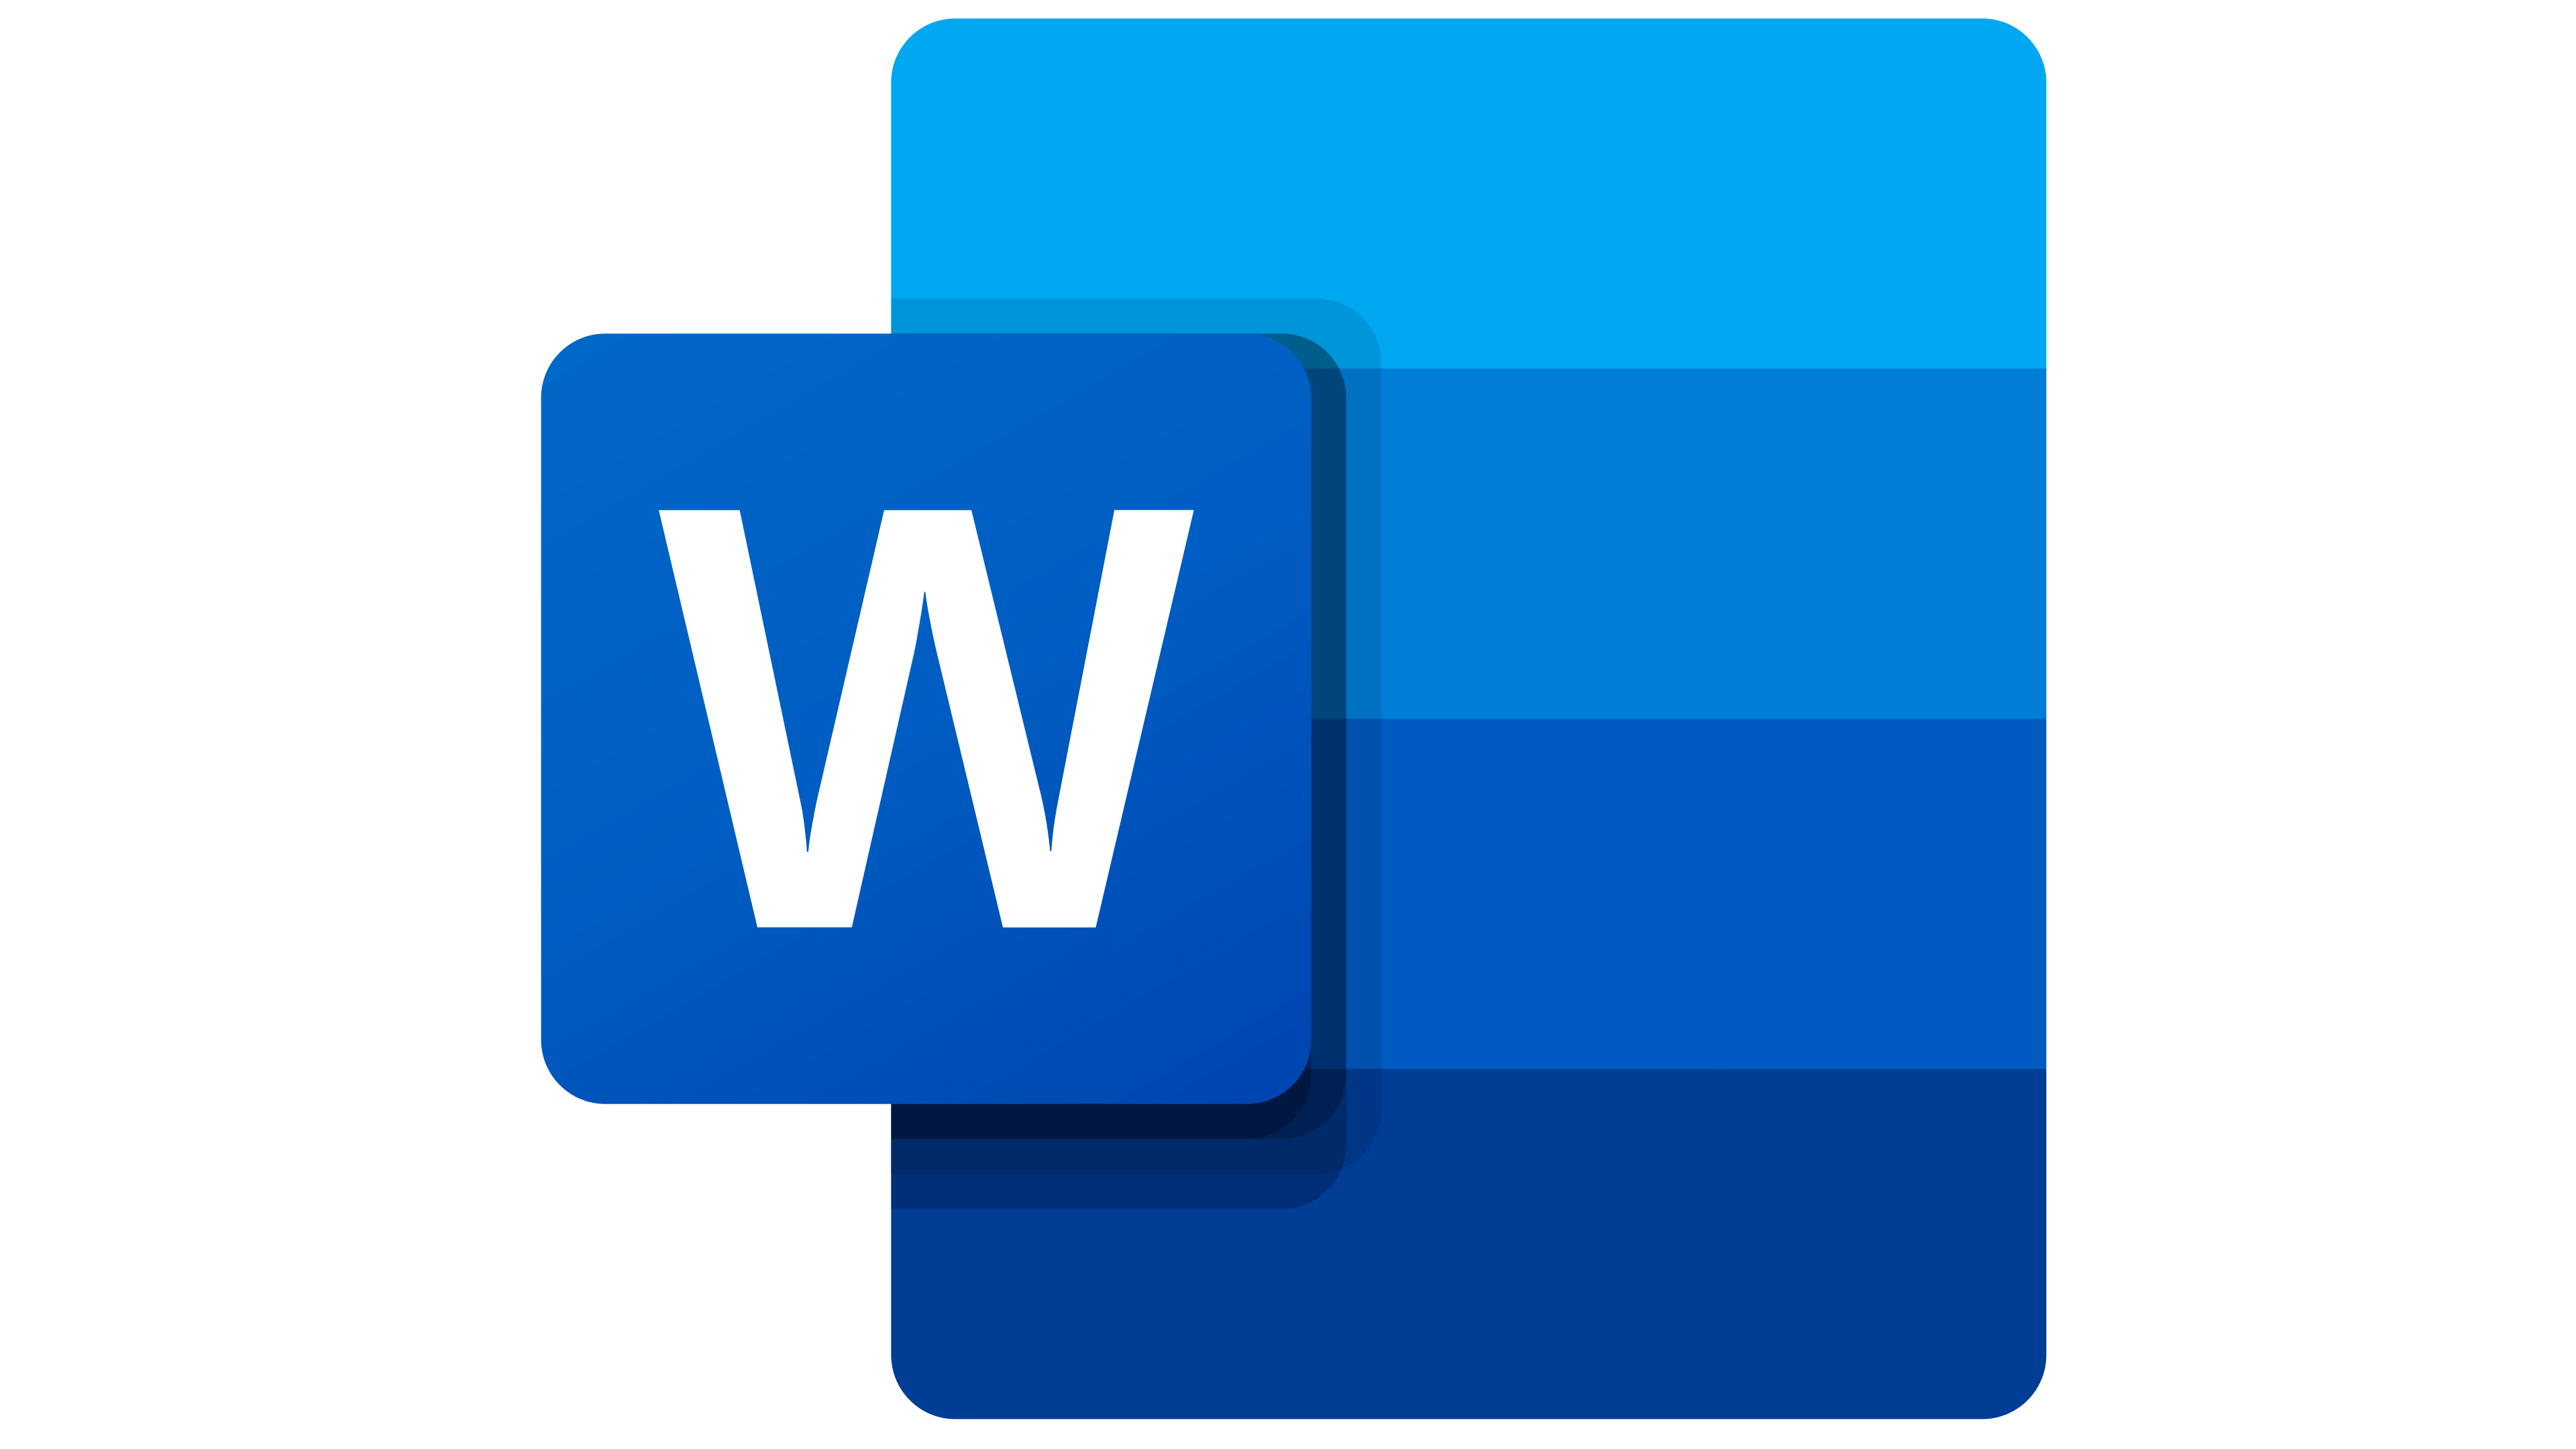 A logo I made for windows 11. SVG in comments : r/windows